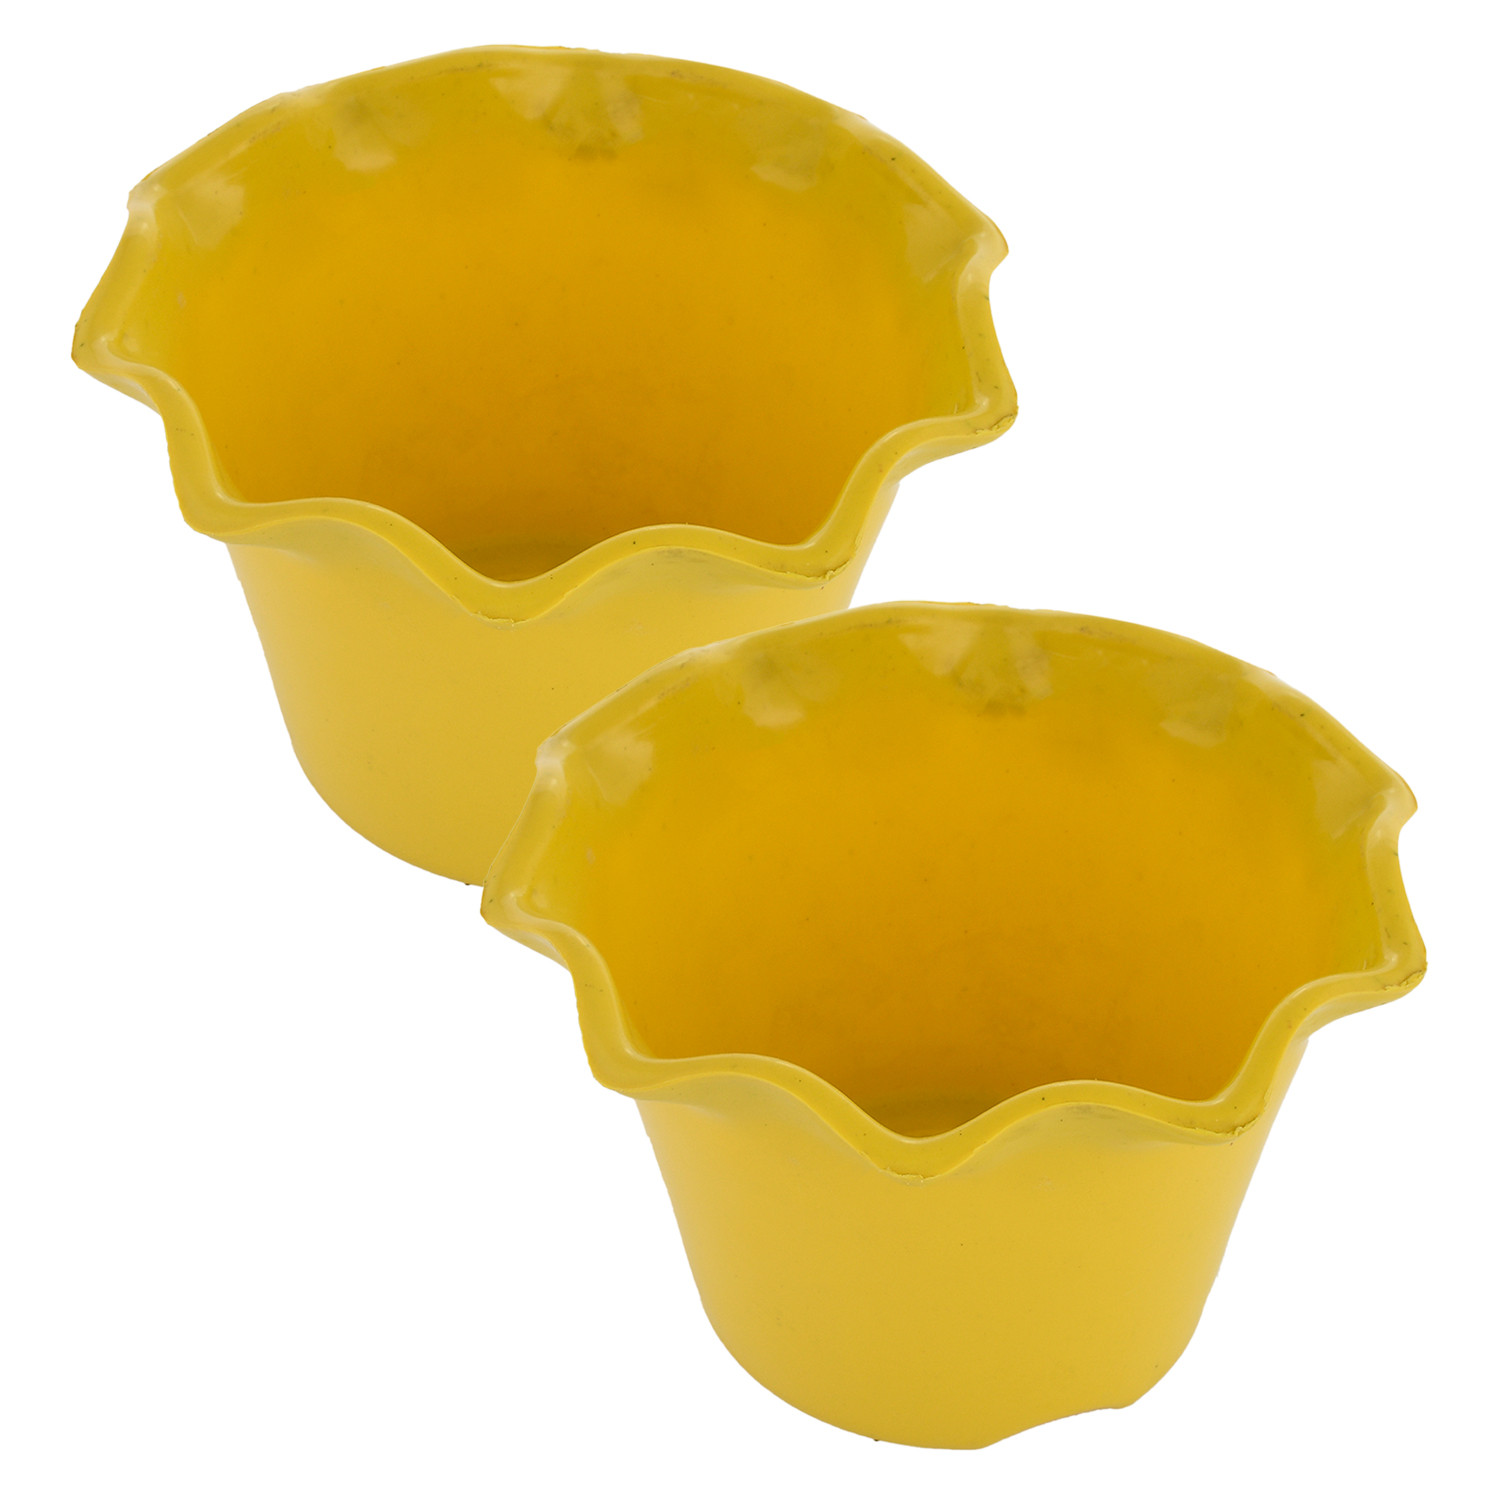 Kuber Industries Blossom Flower Pot|Durable Plastic Flower Pot|Gamla With Drain Holes for Home Décor|Balcony|Garden|8 Inch (Yellow)